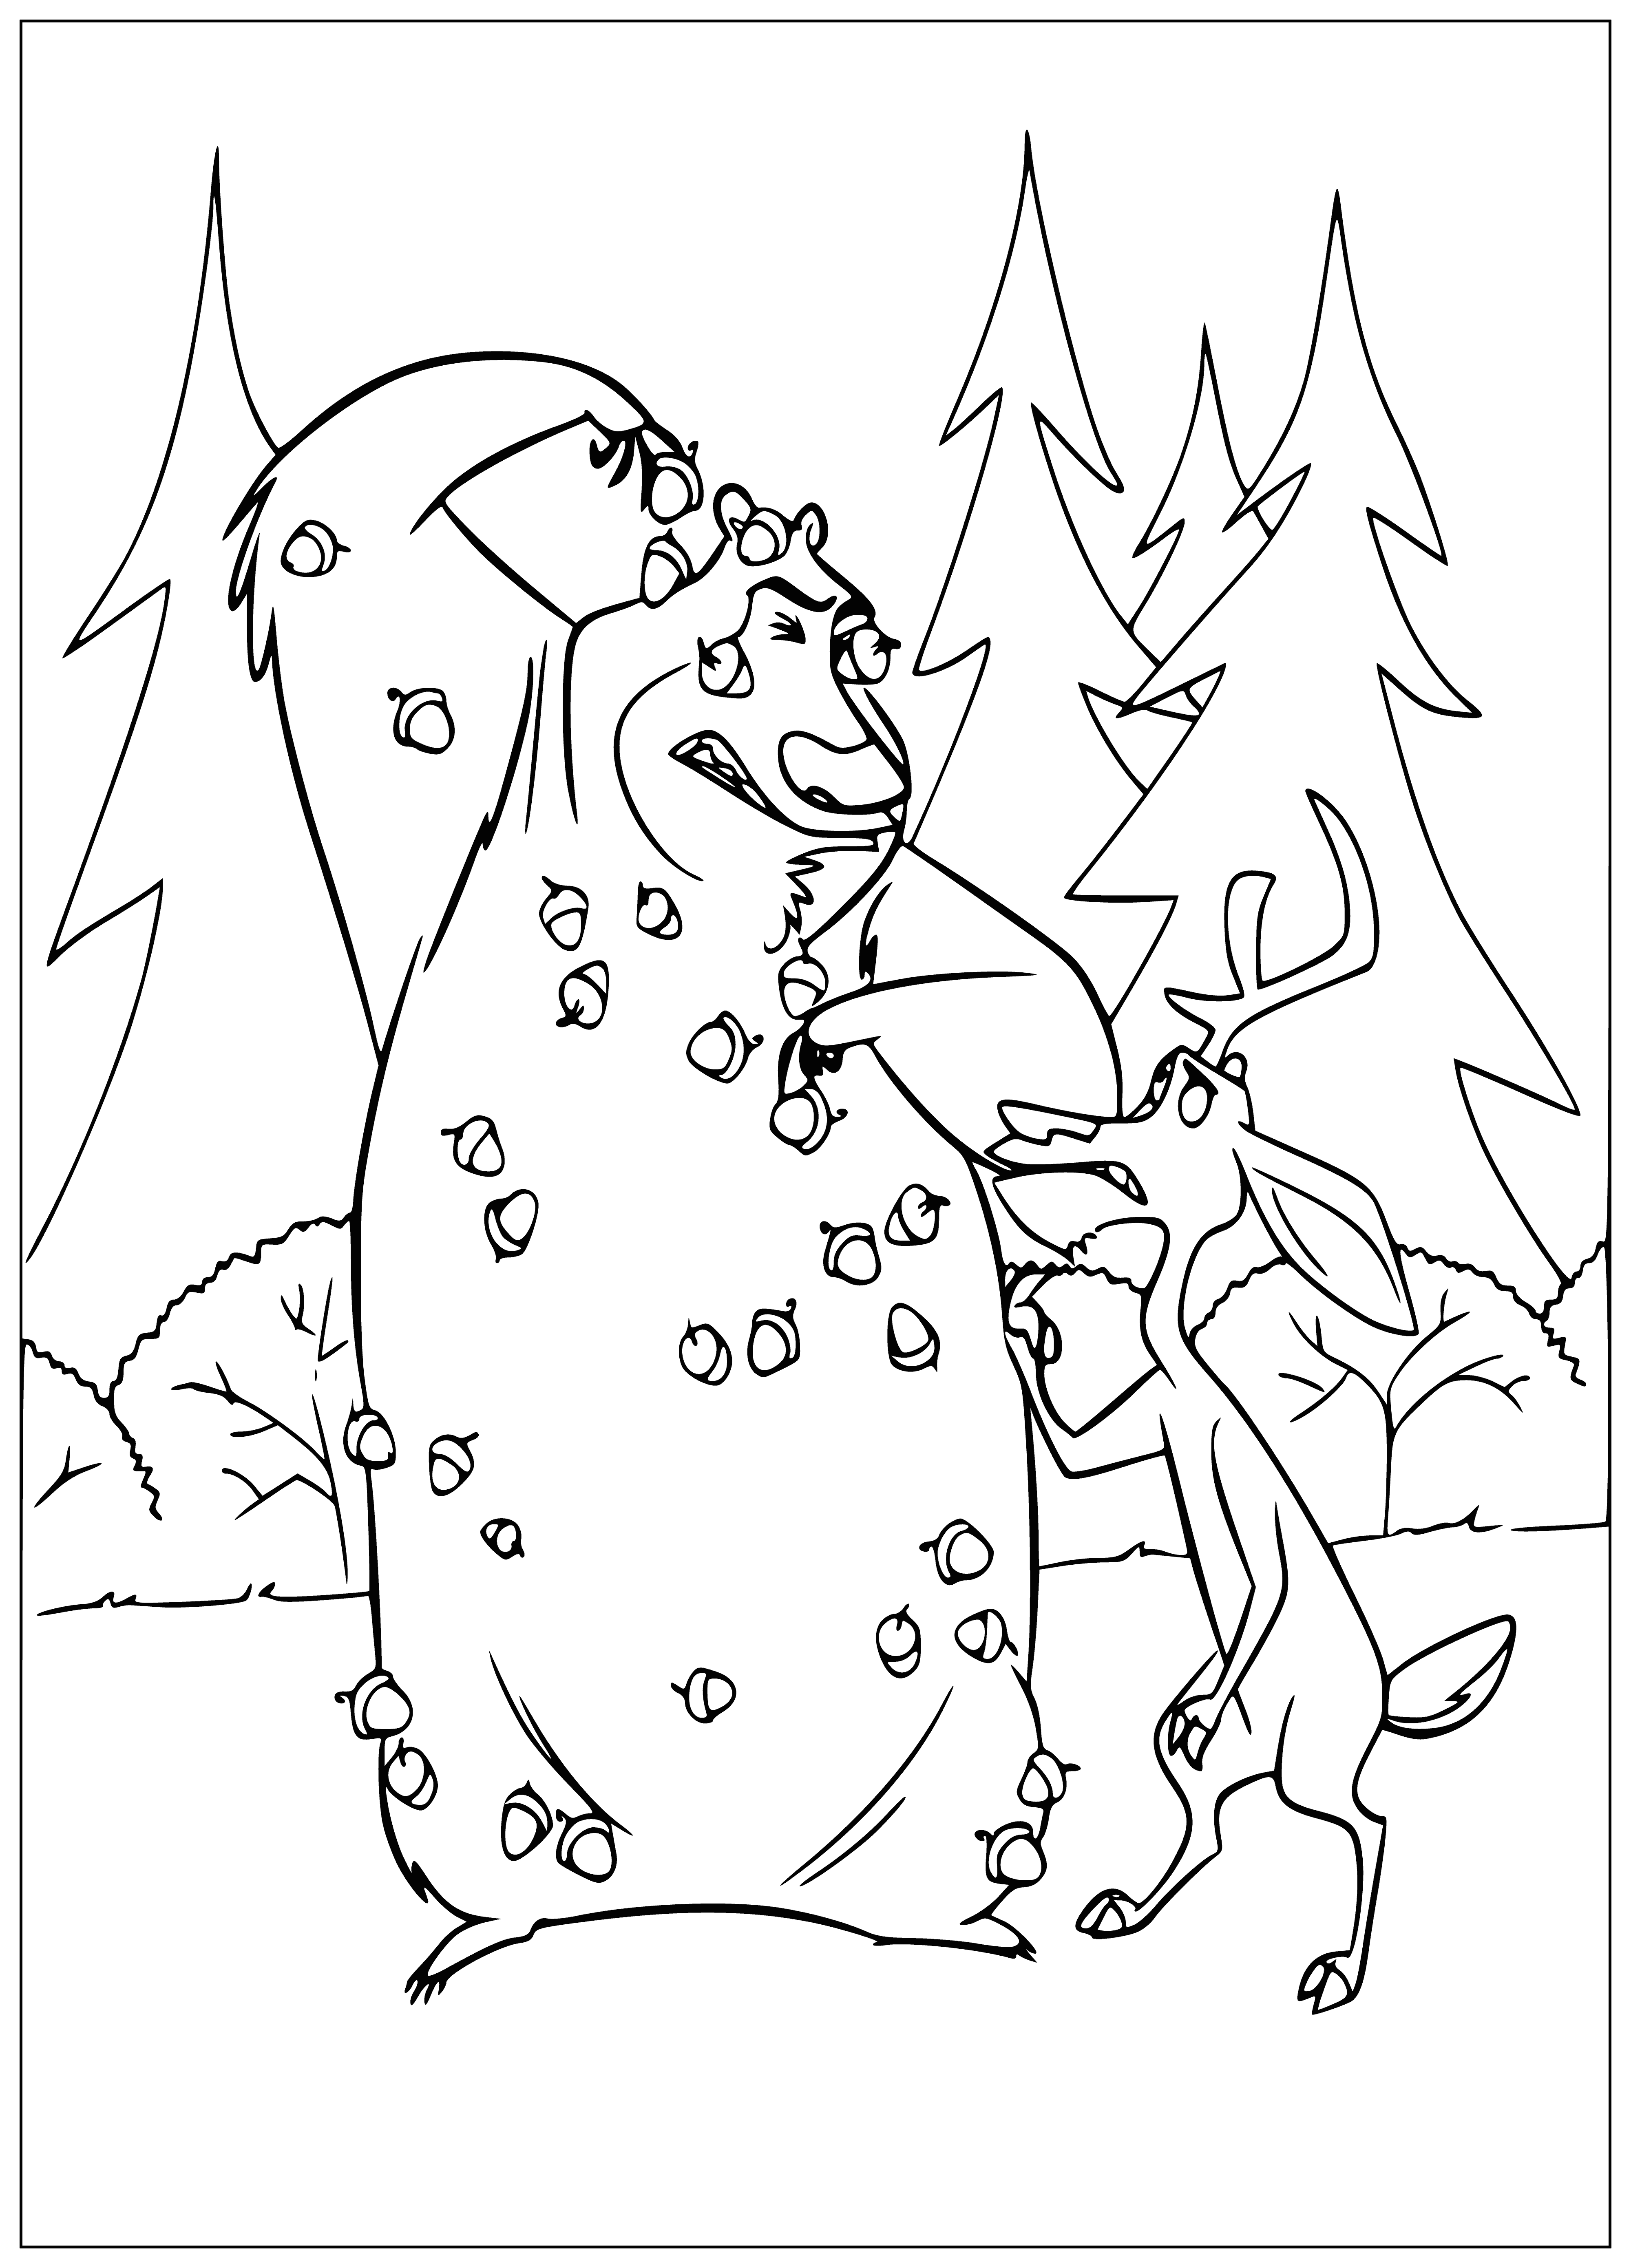 coloring page: #140chars: Boog & Elliot, a bear & deer, stand together as friends in a coloring page.